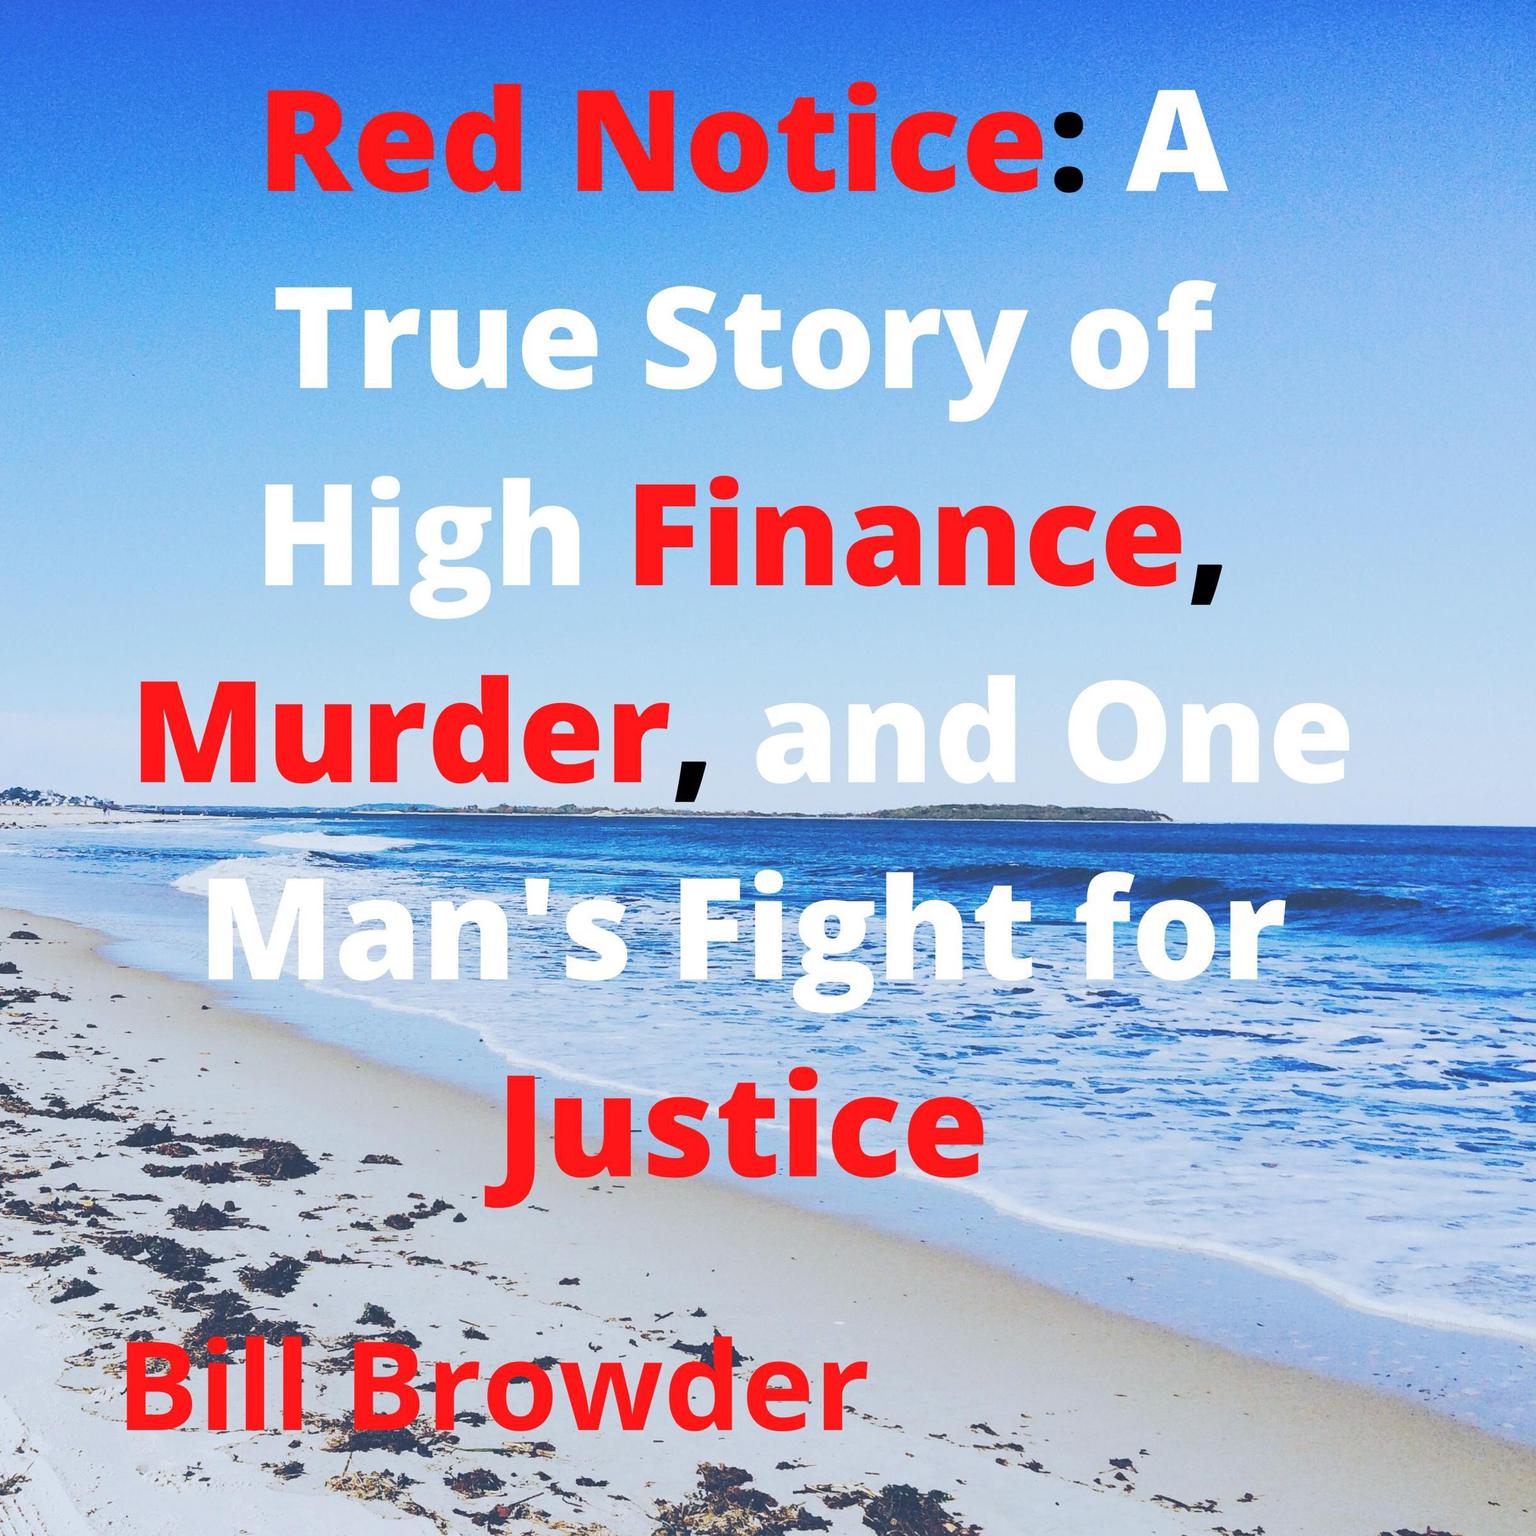 Red Notice: A True Story of High Finance, Murder, and One Mans Fight for Justice (Abridged) Audiobook, by Bill Browder